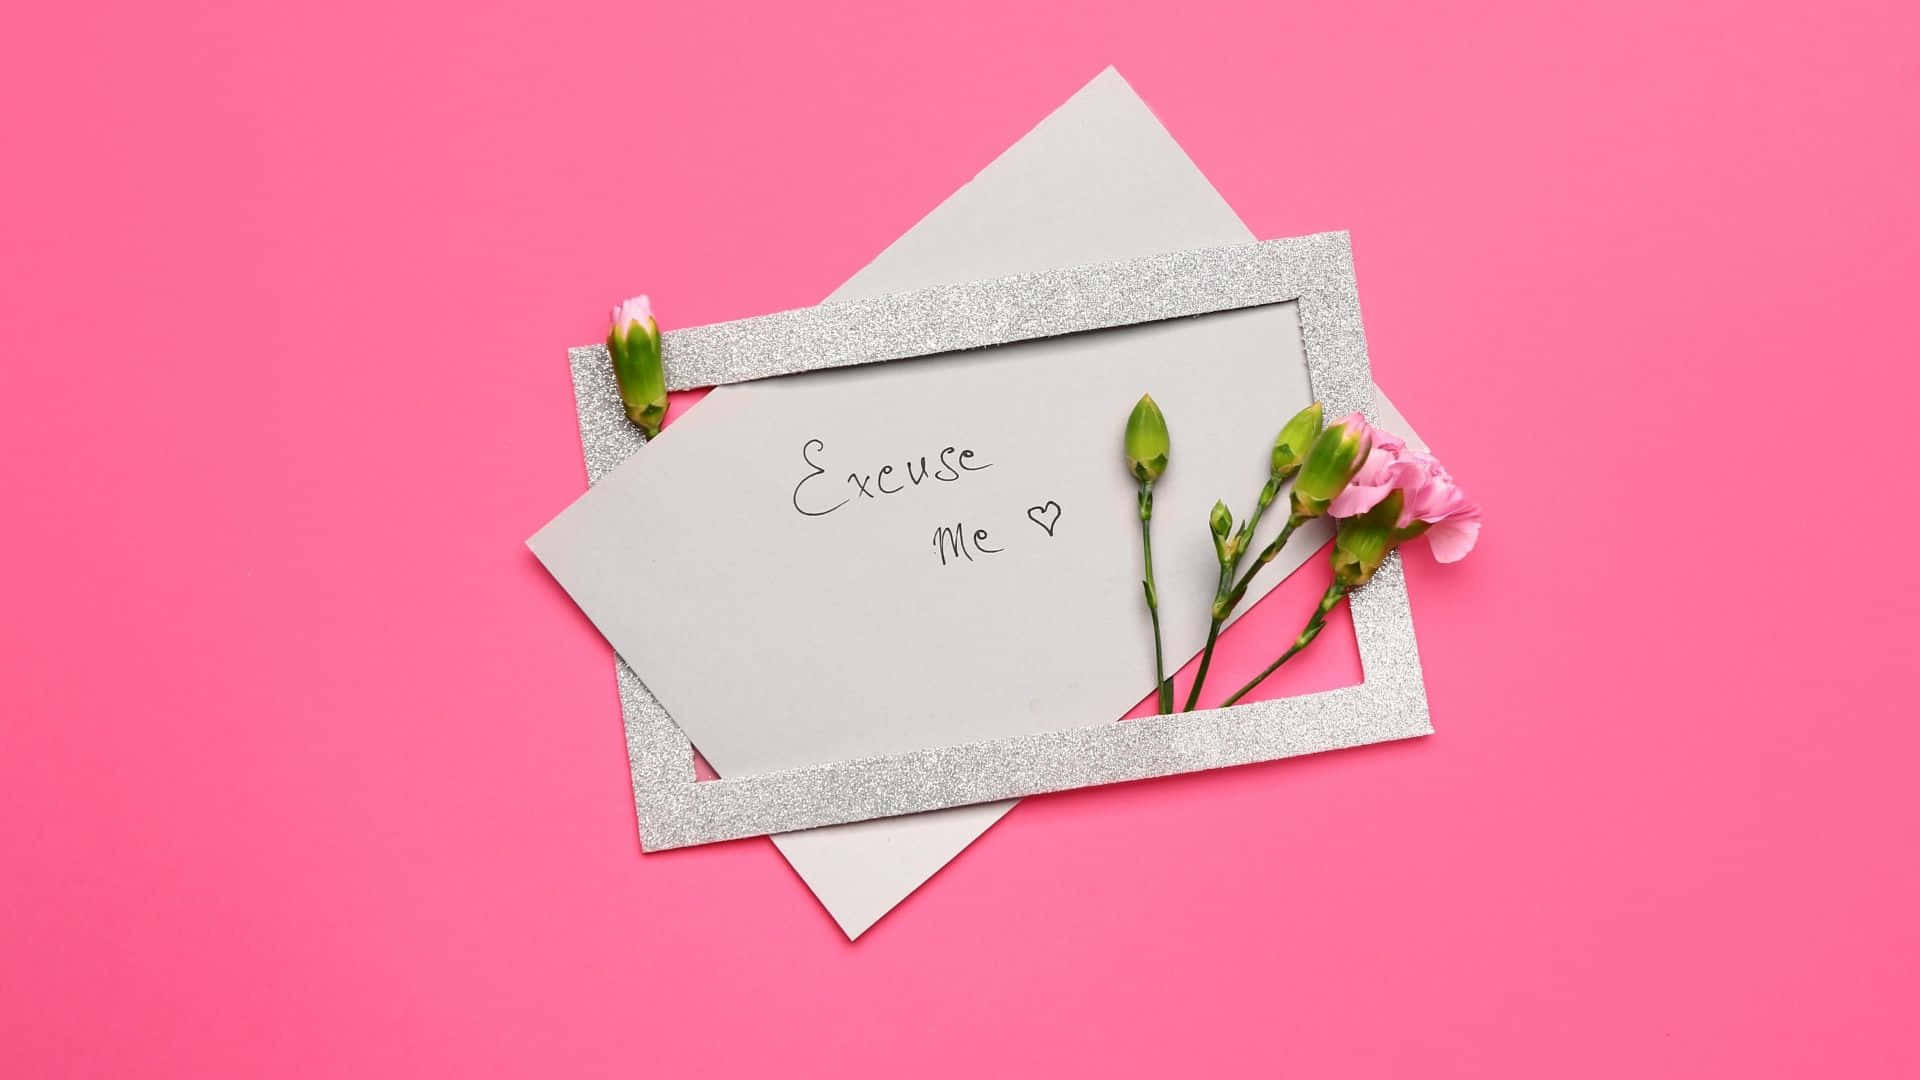 Excuse Me Note With Pink Flowers Background